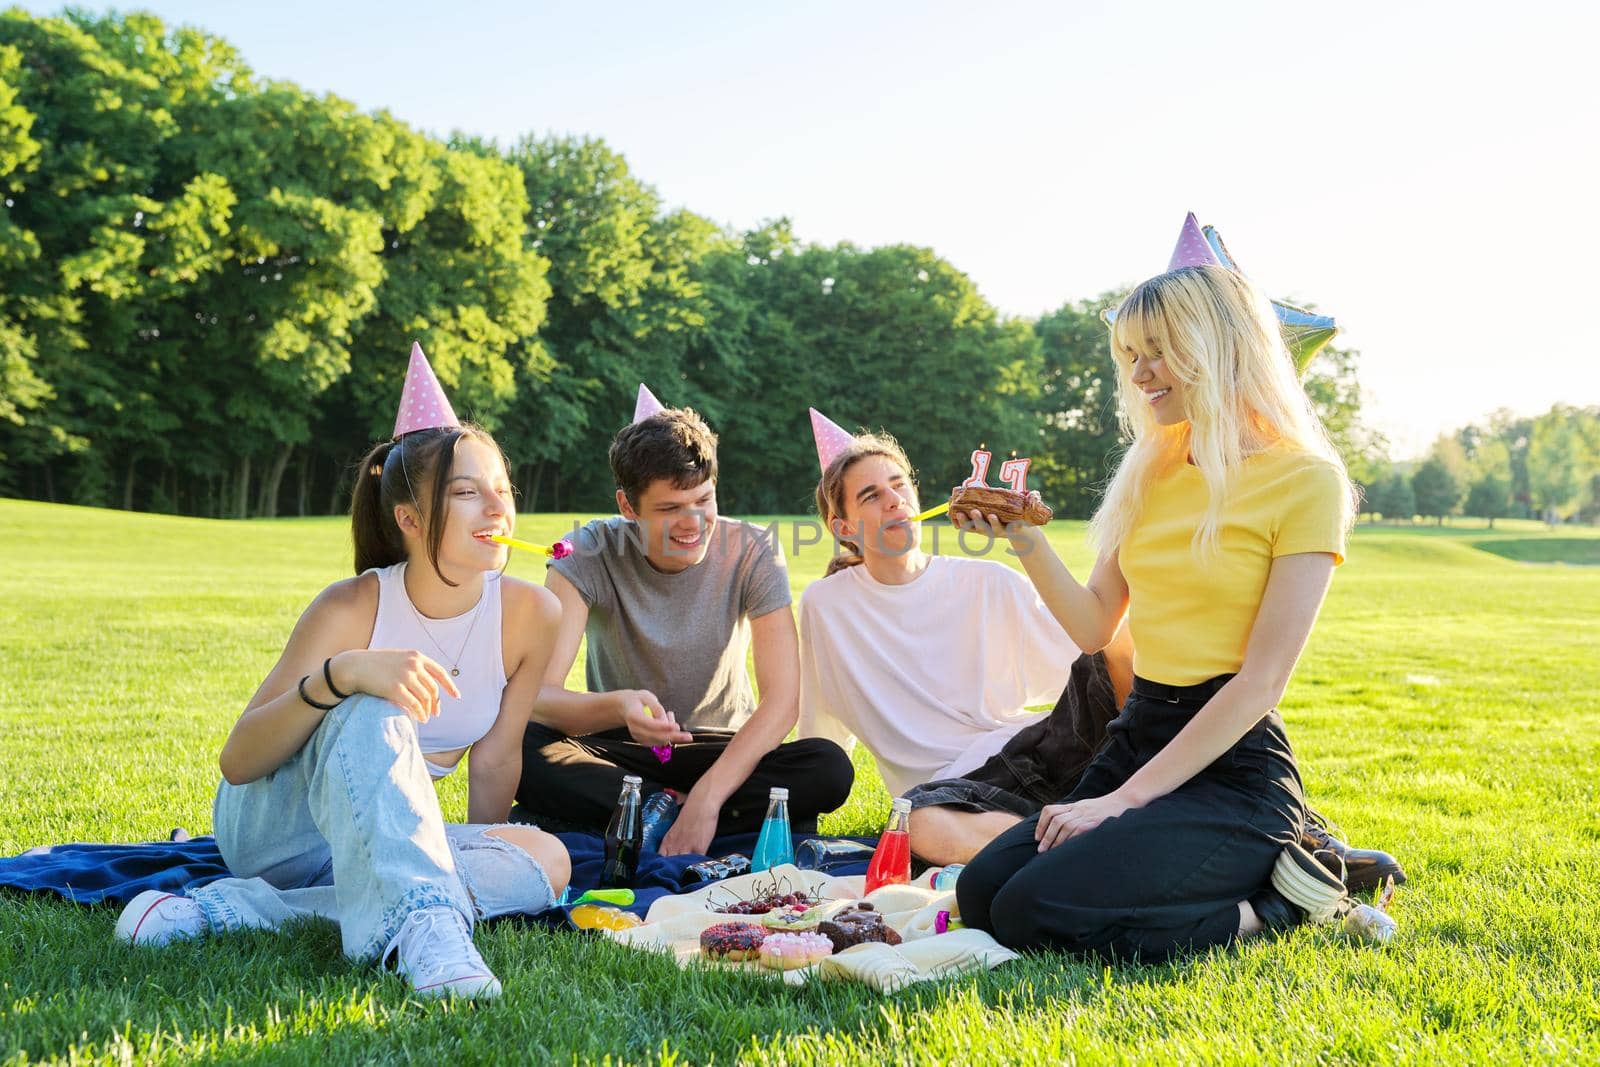 Birthday party. Teenager girl with cake with candles 17, celebrating birthday with friends, teenagers in festive hats sitting on grass in park, summer sunny day